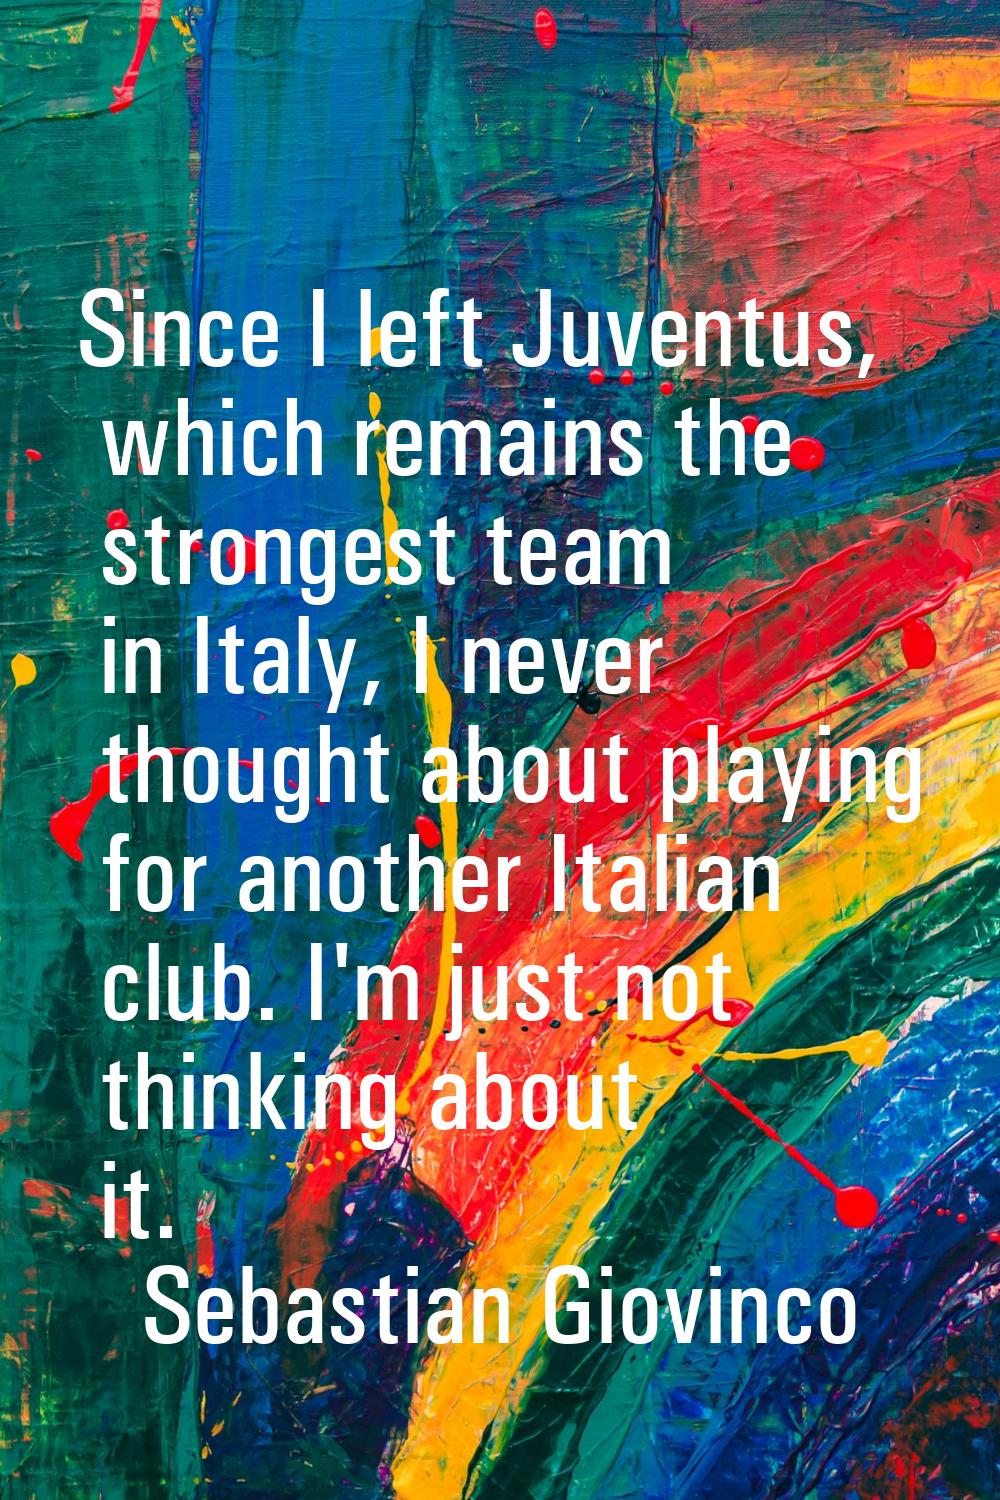 Since I left Juventus, which remains the strongest team in Italy, I never thought about playing for